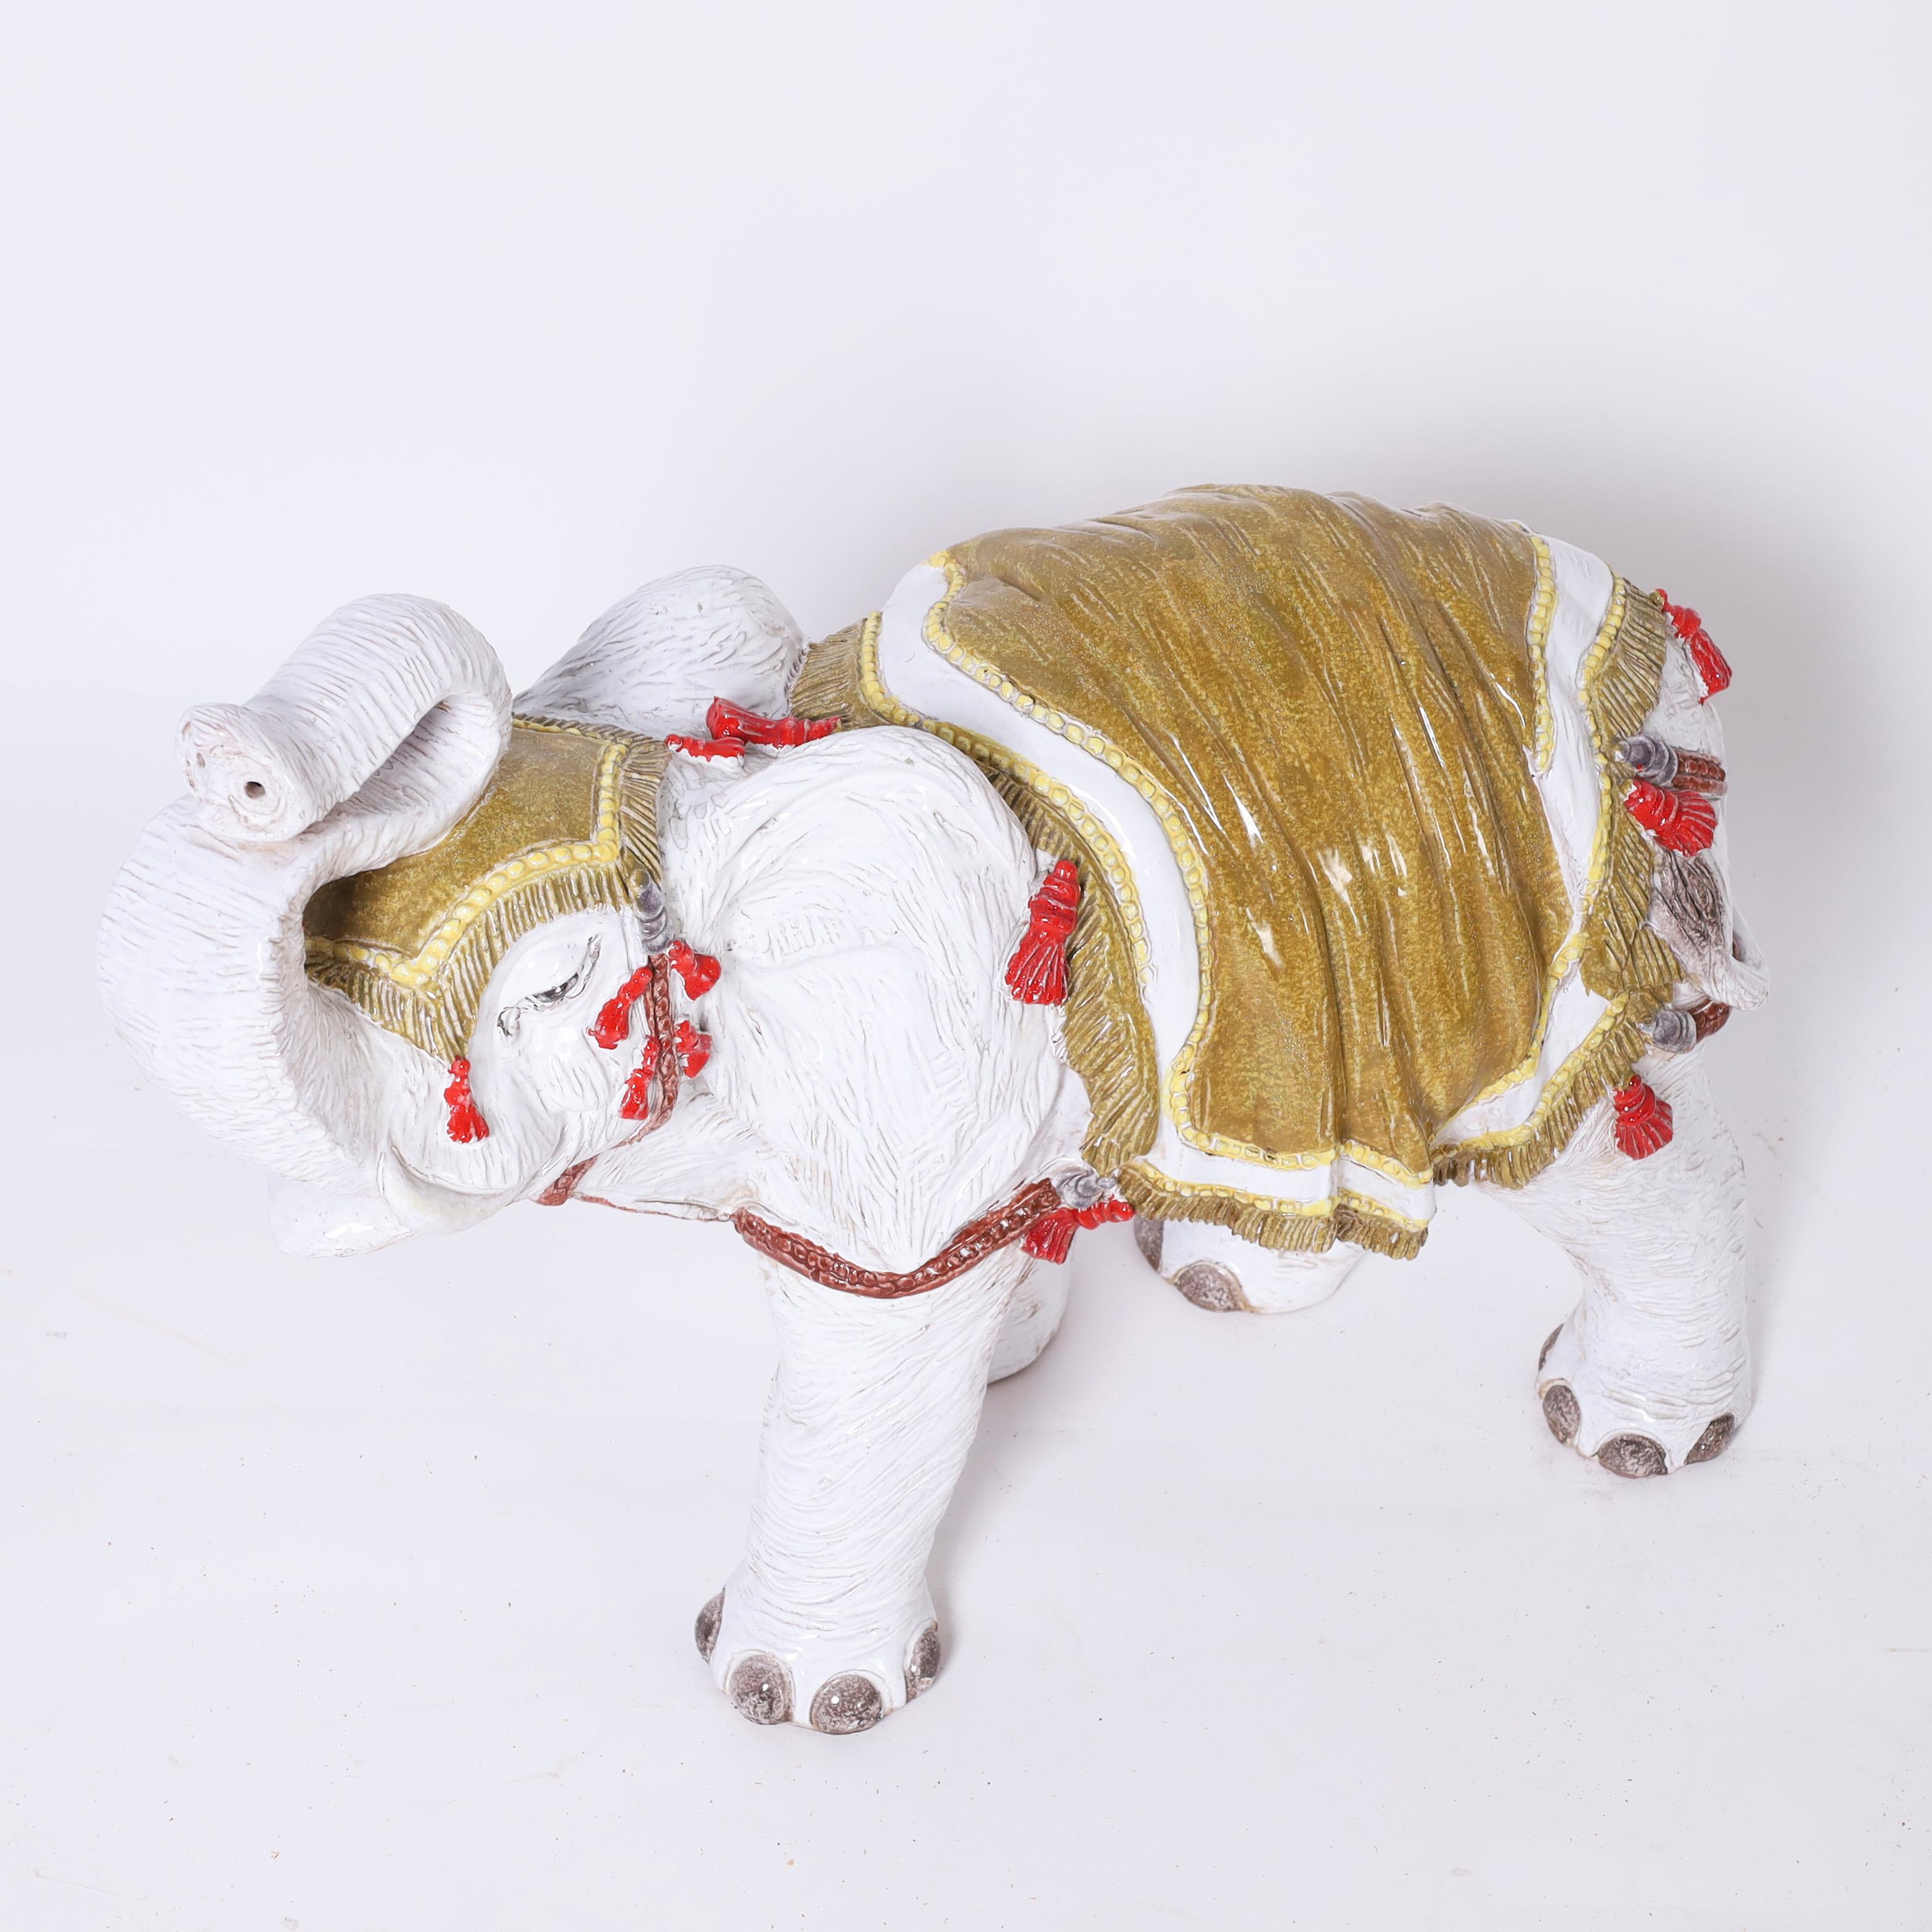 Standout mid century Italian elephant sculpture crafted in terracotta, hand decorated and glazed. Trunk up for good luck.